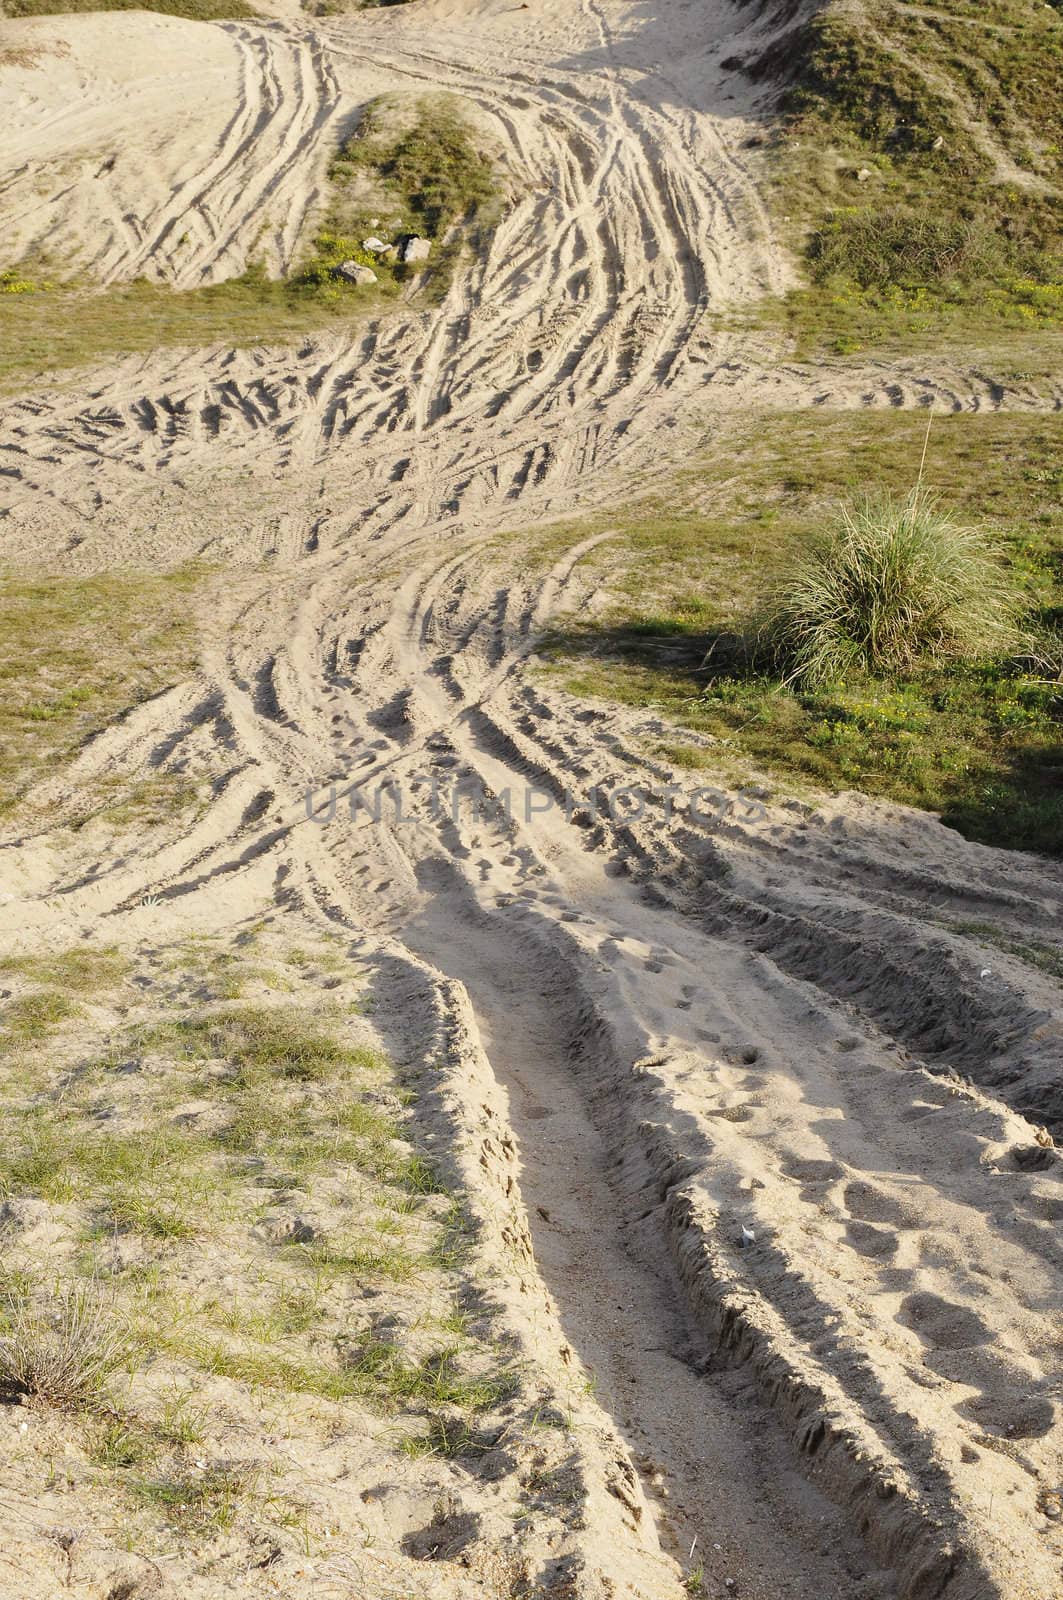 Many tyre traces in the sand dunes with little vegetation